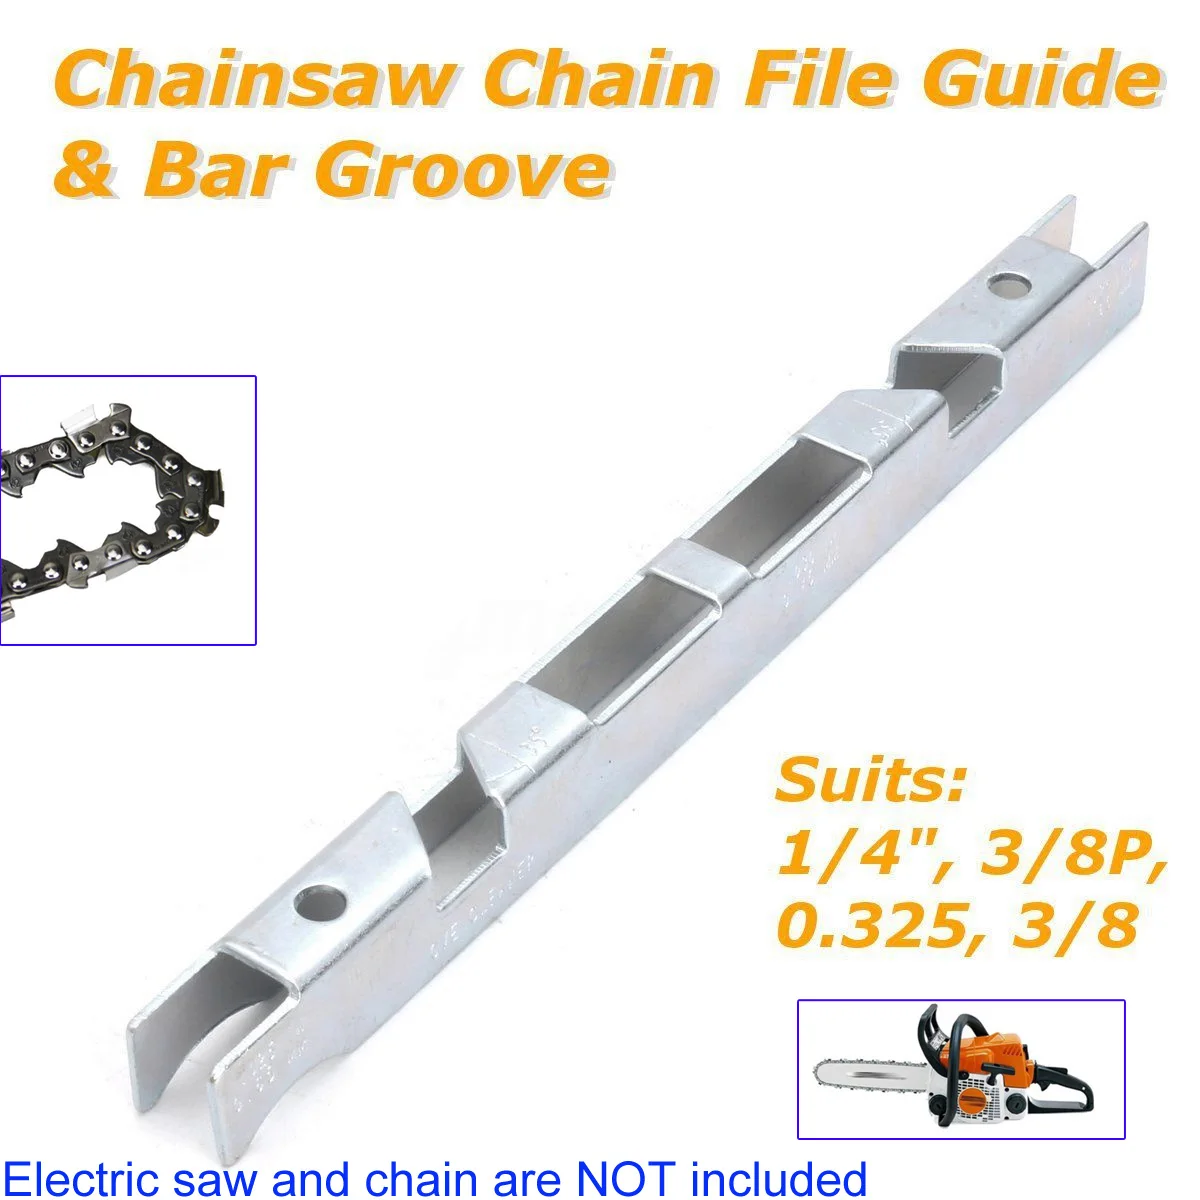 Lawn Mower Chainsaw Chain Depth Gauge Rails and Slots Universal 1/4